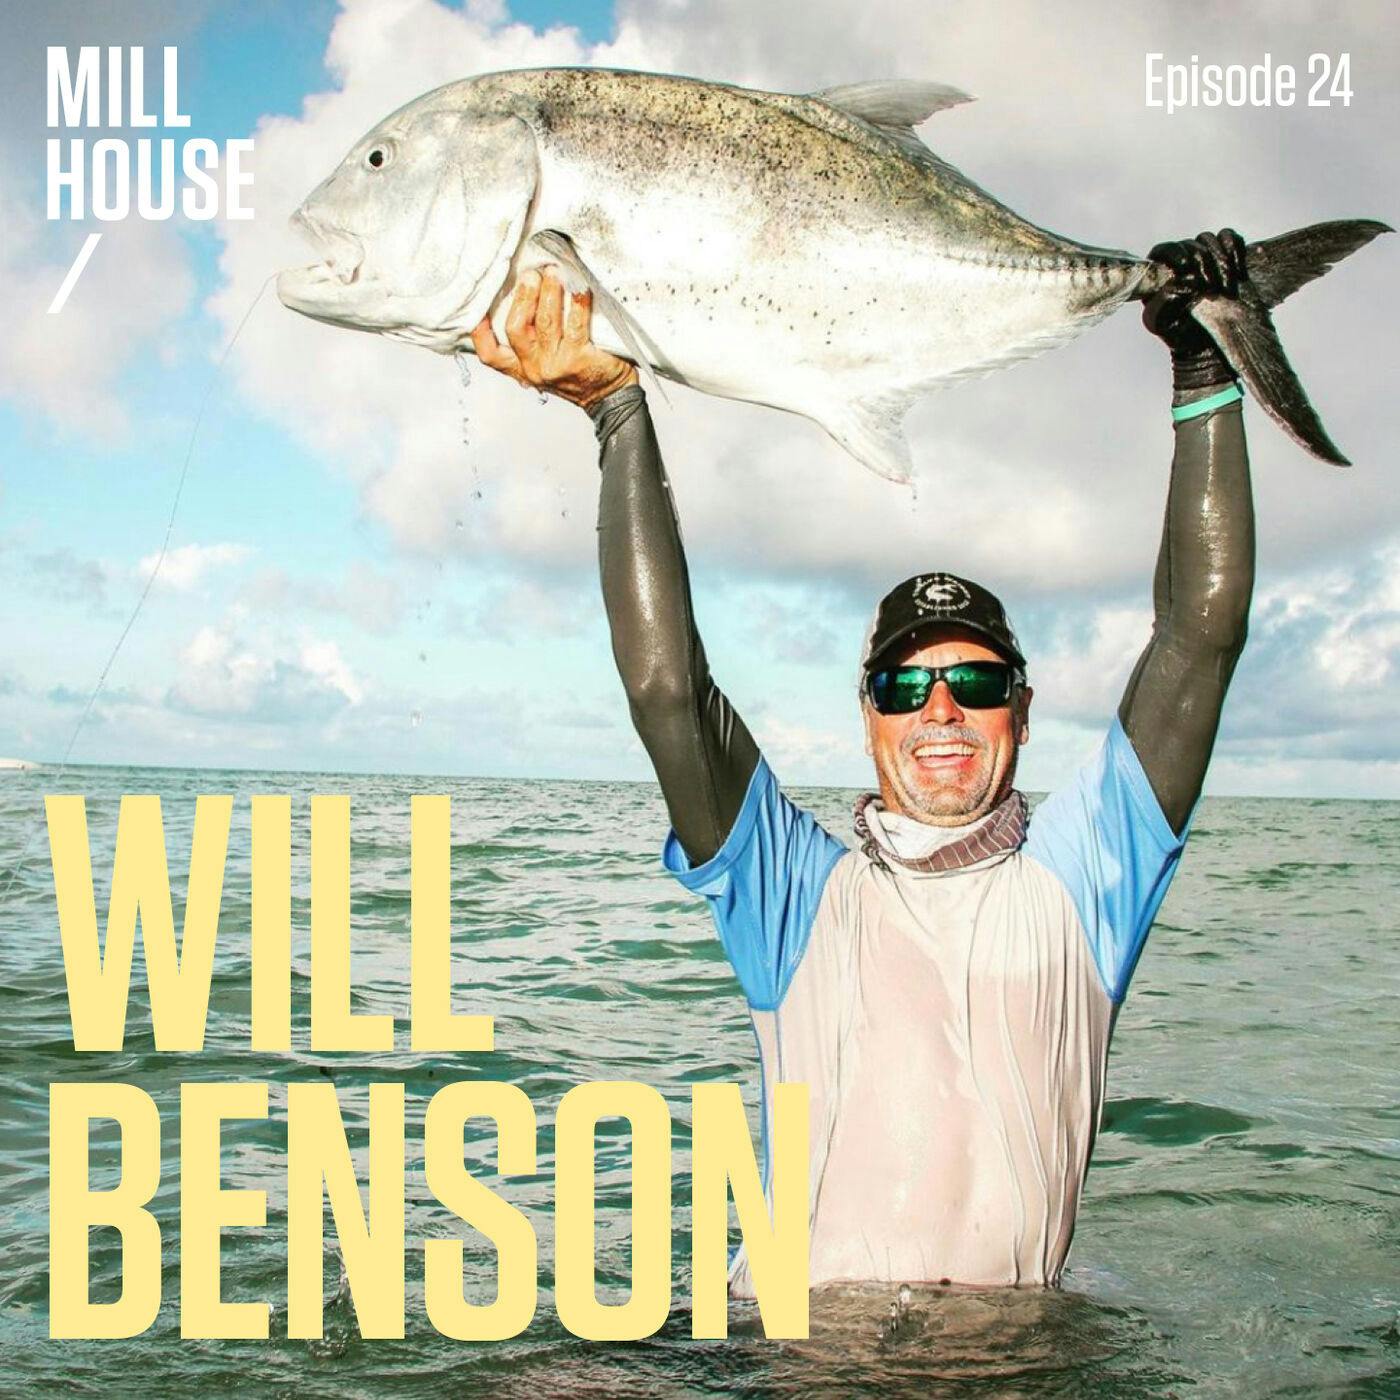 Episode 24: Capt. Will Benson - Permit, Cruise Ships, & Conservation